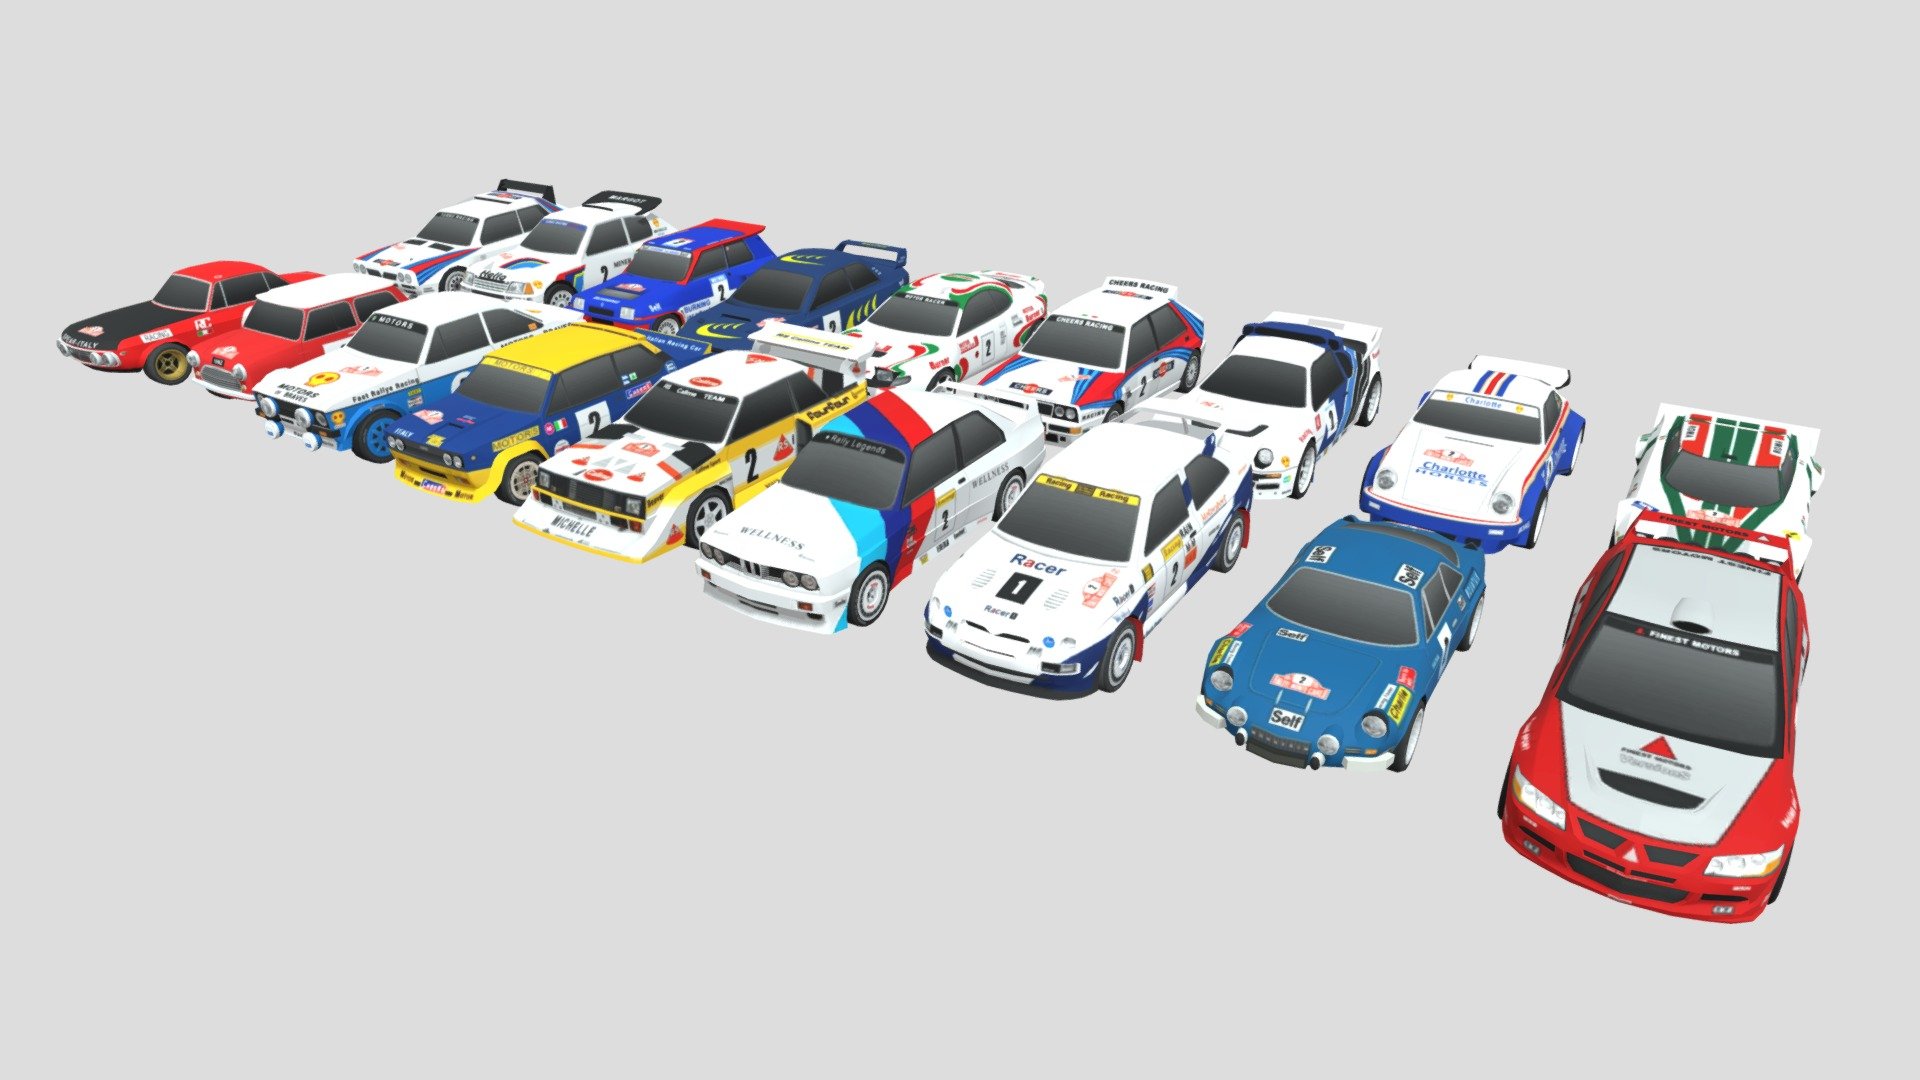 18 rally cars ready to use.

Use this for your game, video, and commercial 3d model